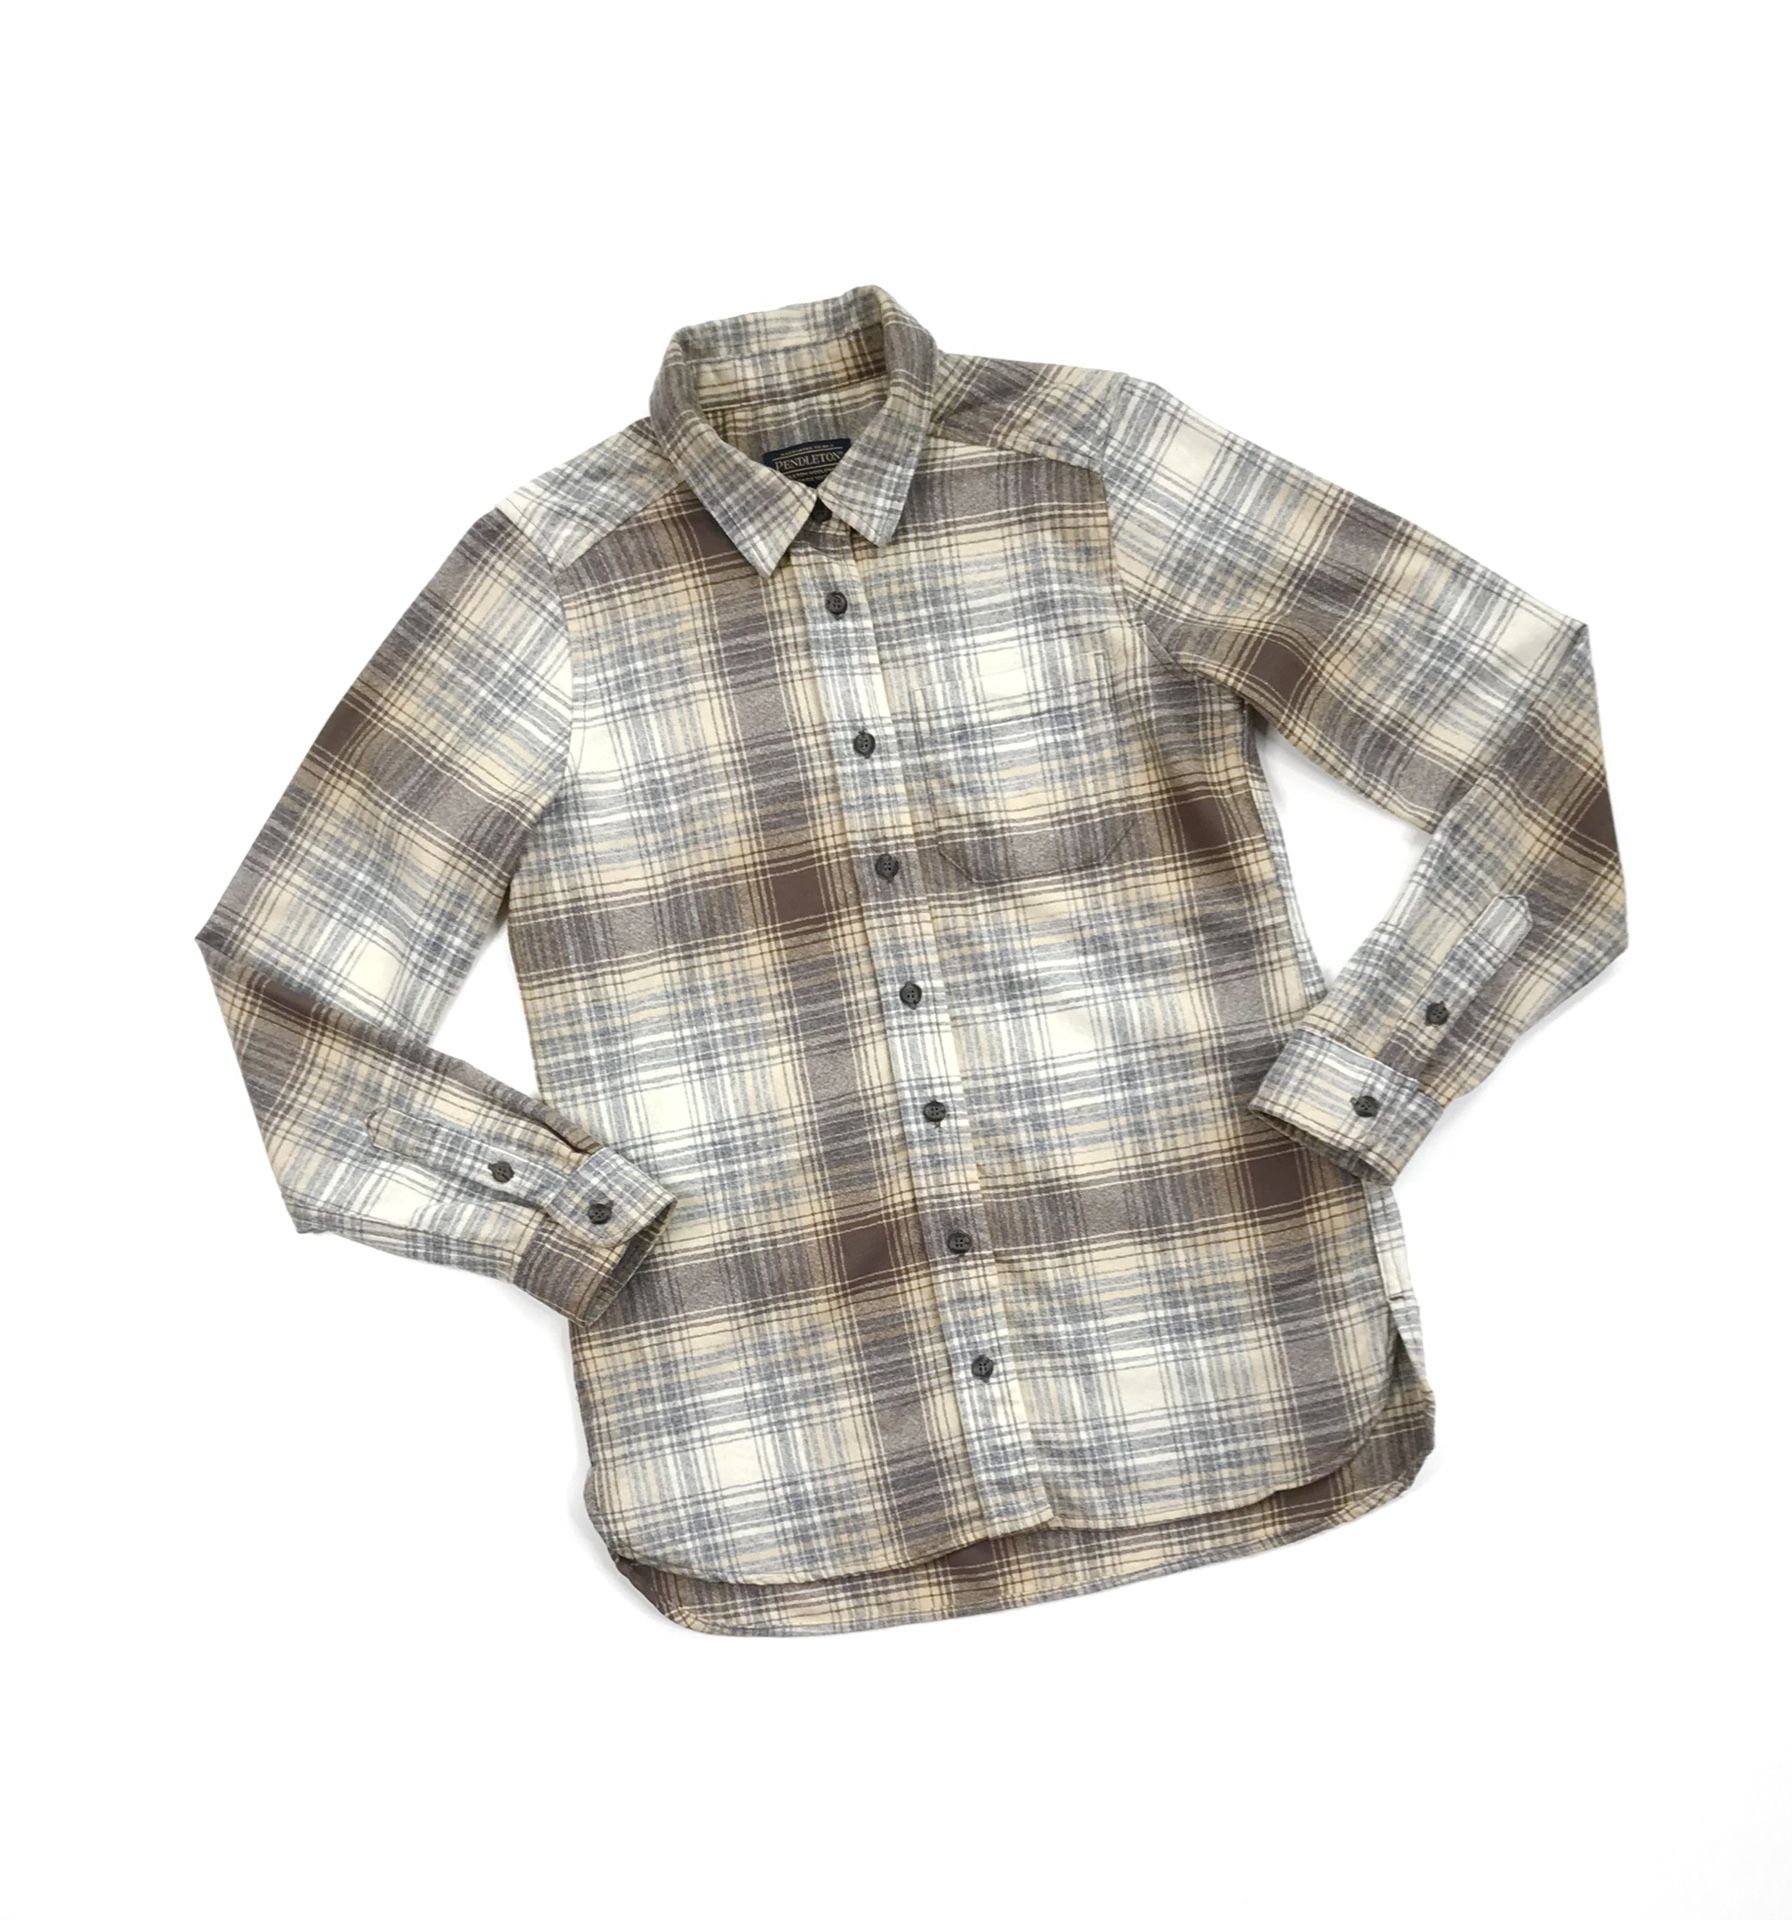 PENDLETON BUTTON UP SHIRT XS X SMALL MENS BEIGE FLANNEL PLAID WOOL LONG SLEEVE